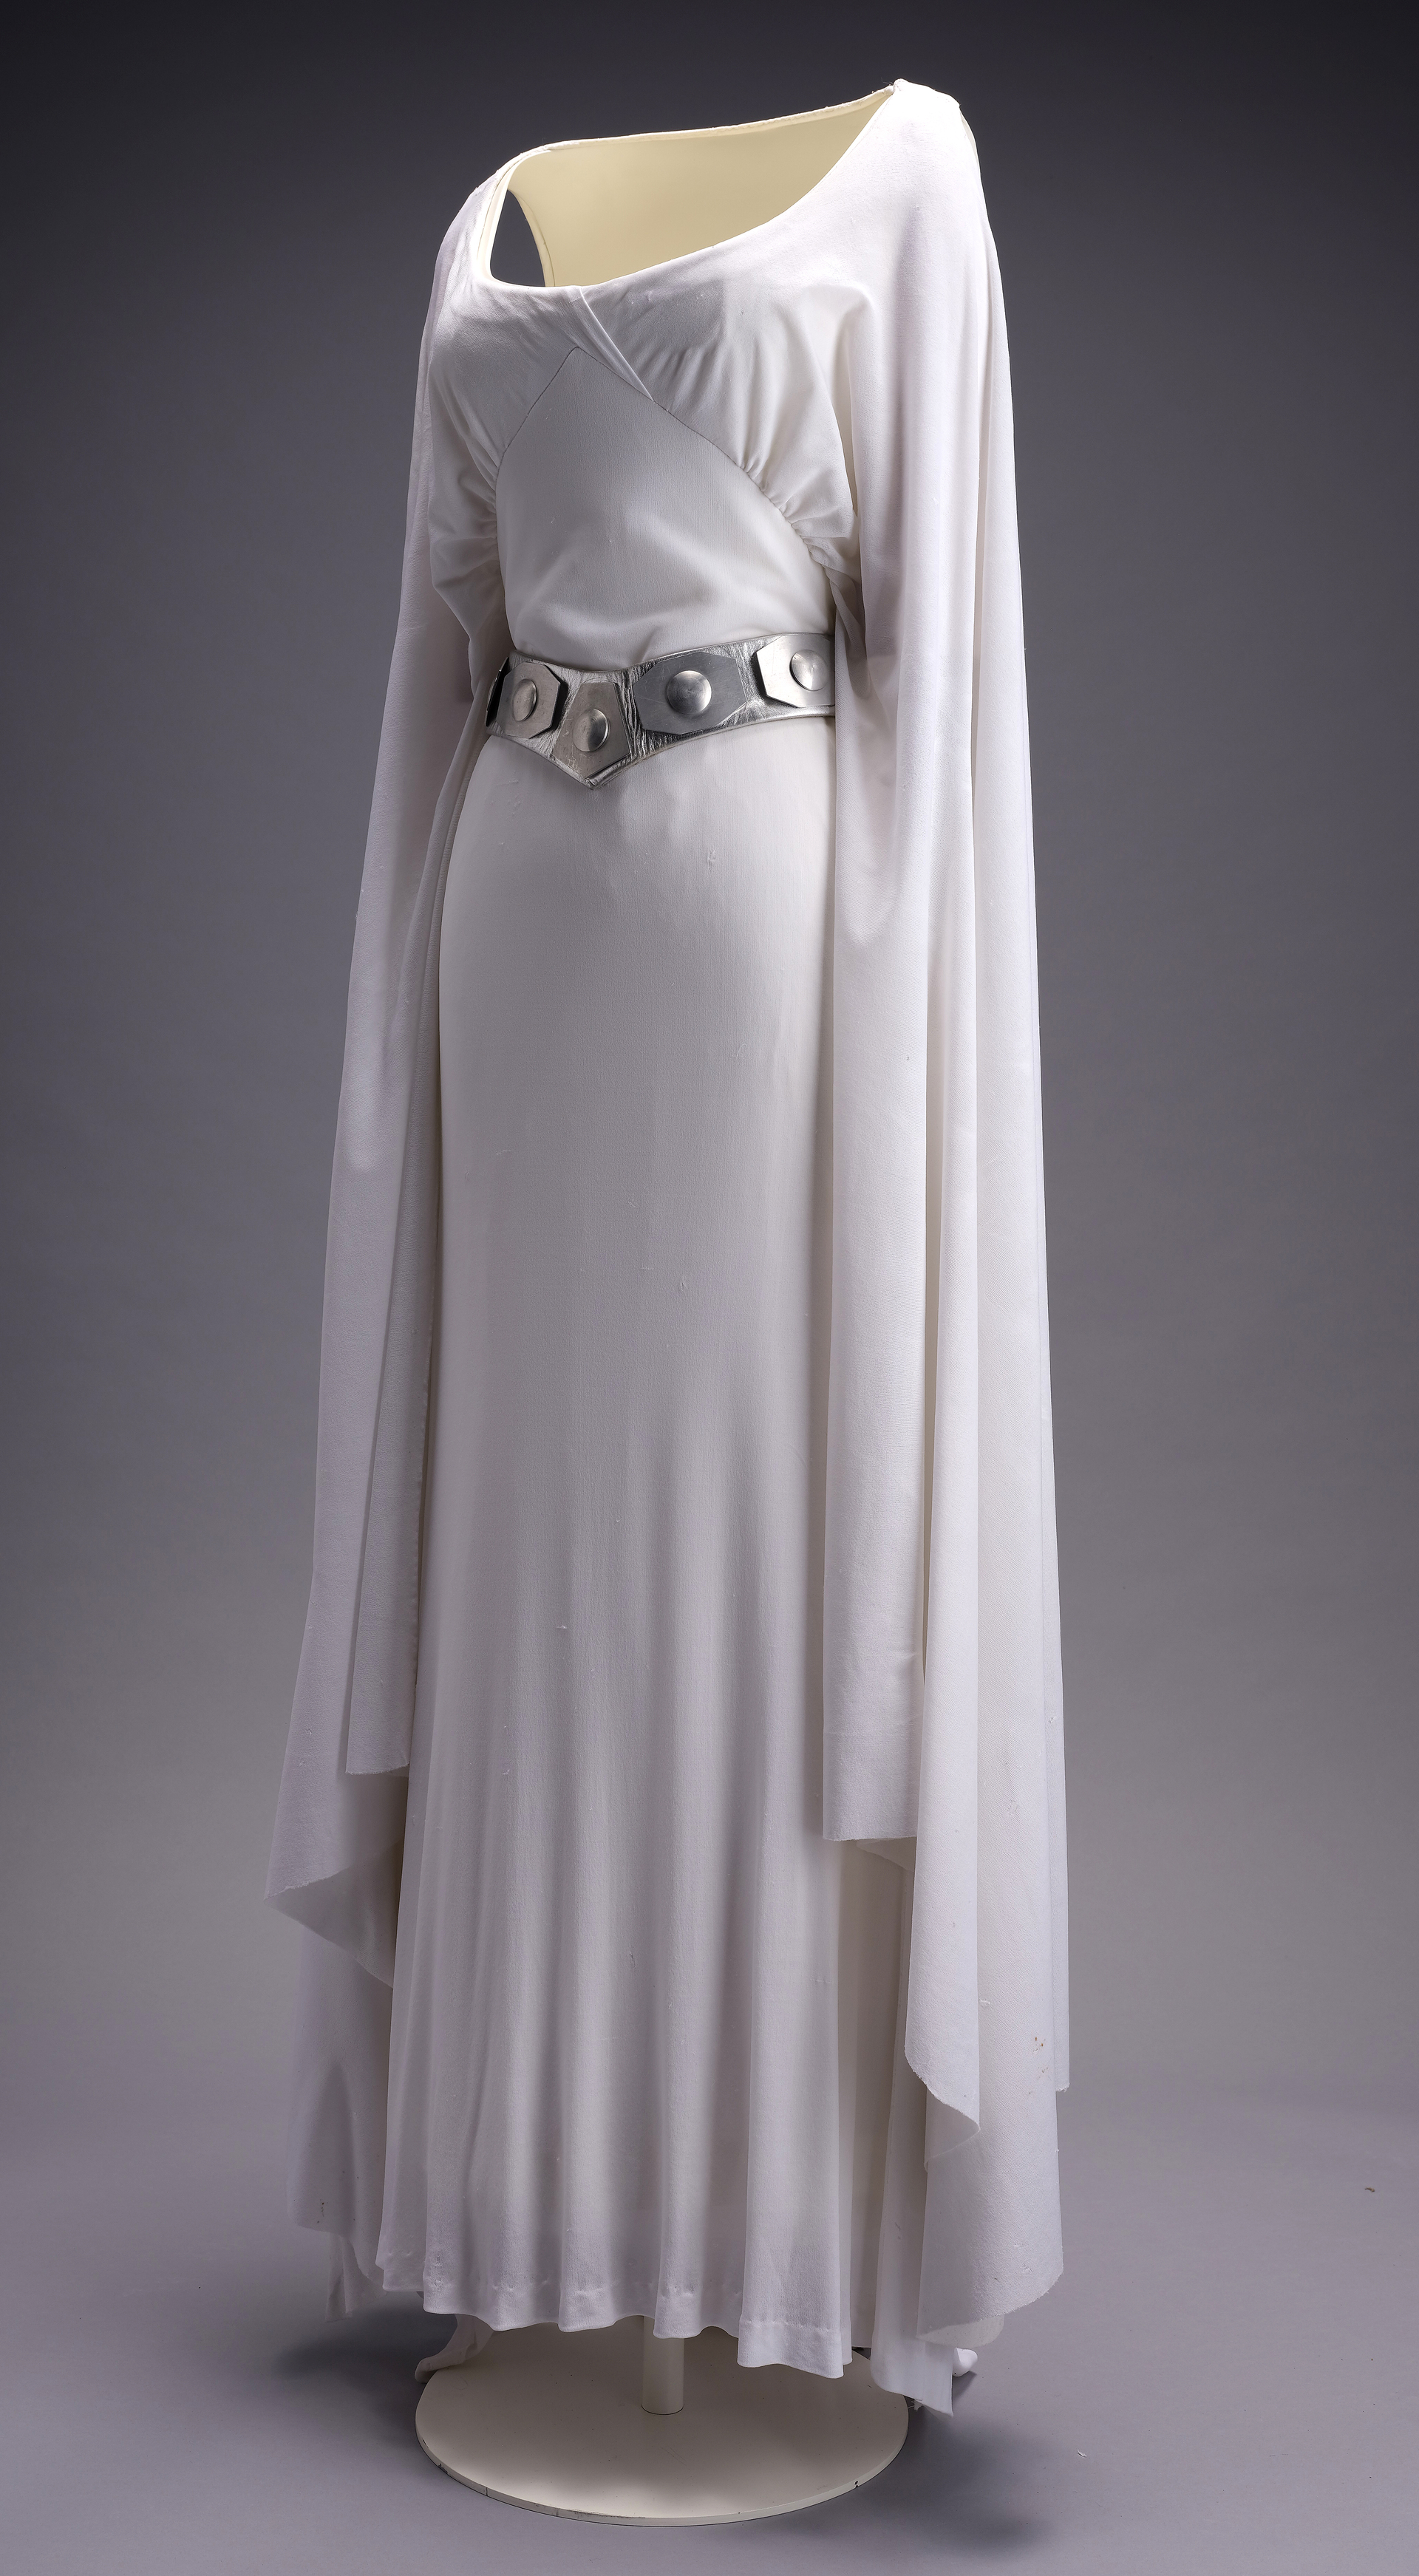 STAR WARS: A NEW HOPE (1977) - Princess Leia's (Carrie Fisher) Screen-Matched Ceremonial Dress - Image 19 of 39